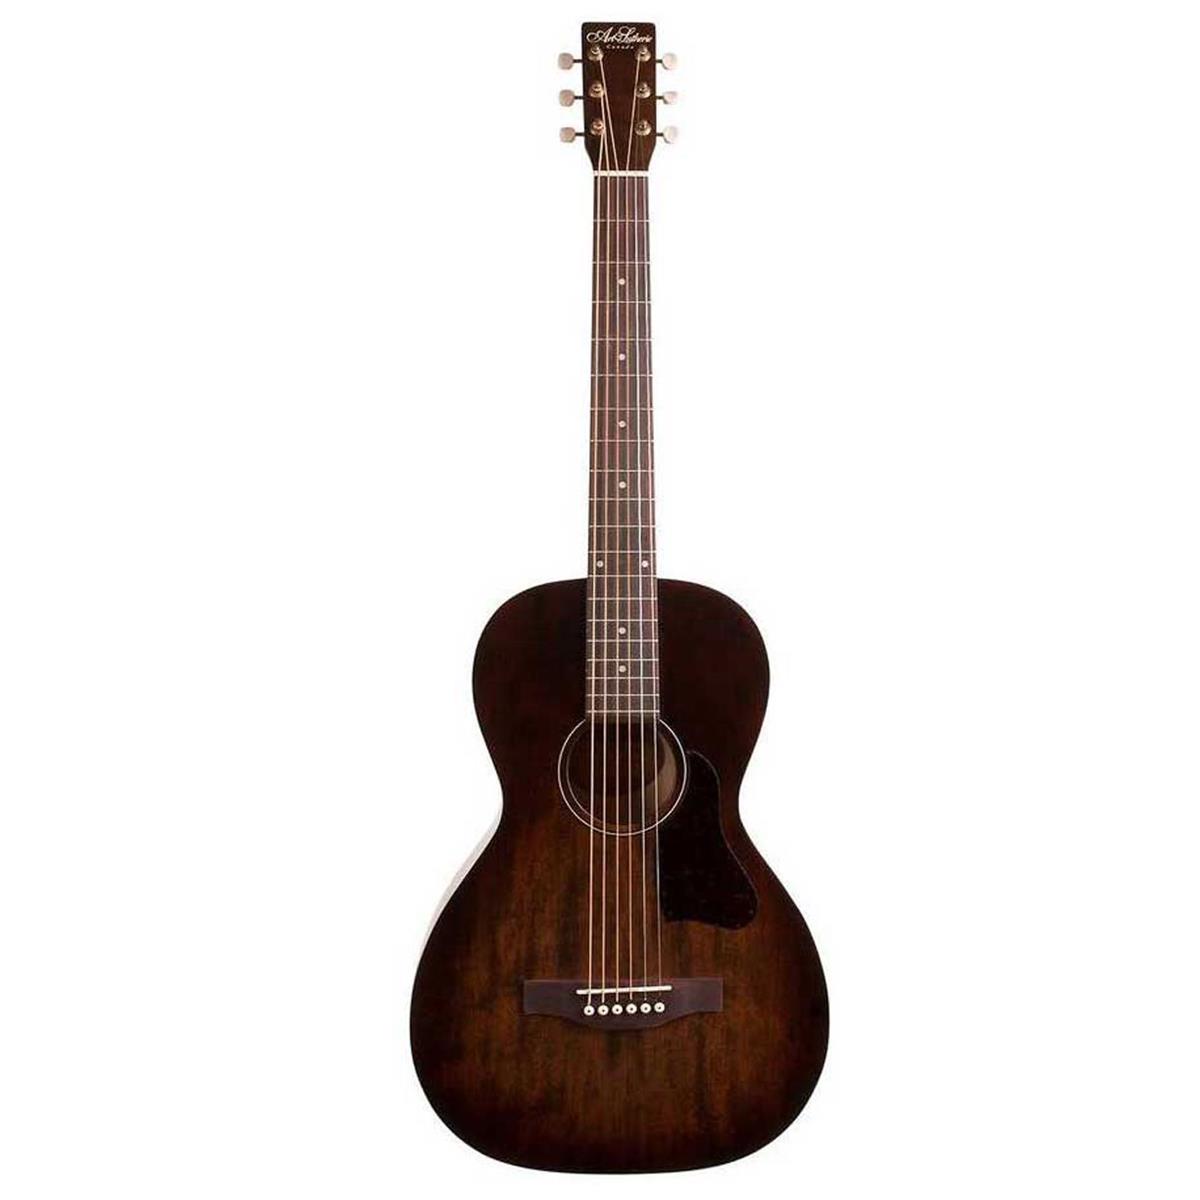 Art & Lutherie Roadhouse Parlor Acoustic Guitar w/Gig Bag,Rosewood,Bourbon Burst -  Art & Lutherie, 045549